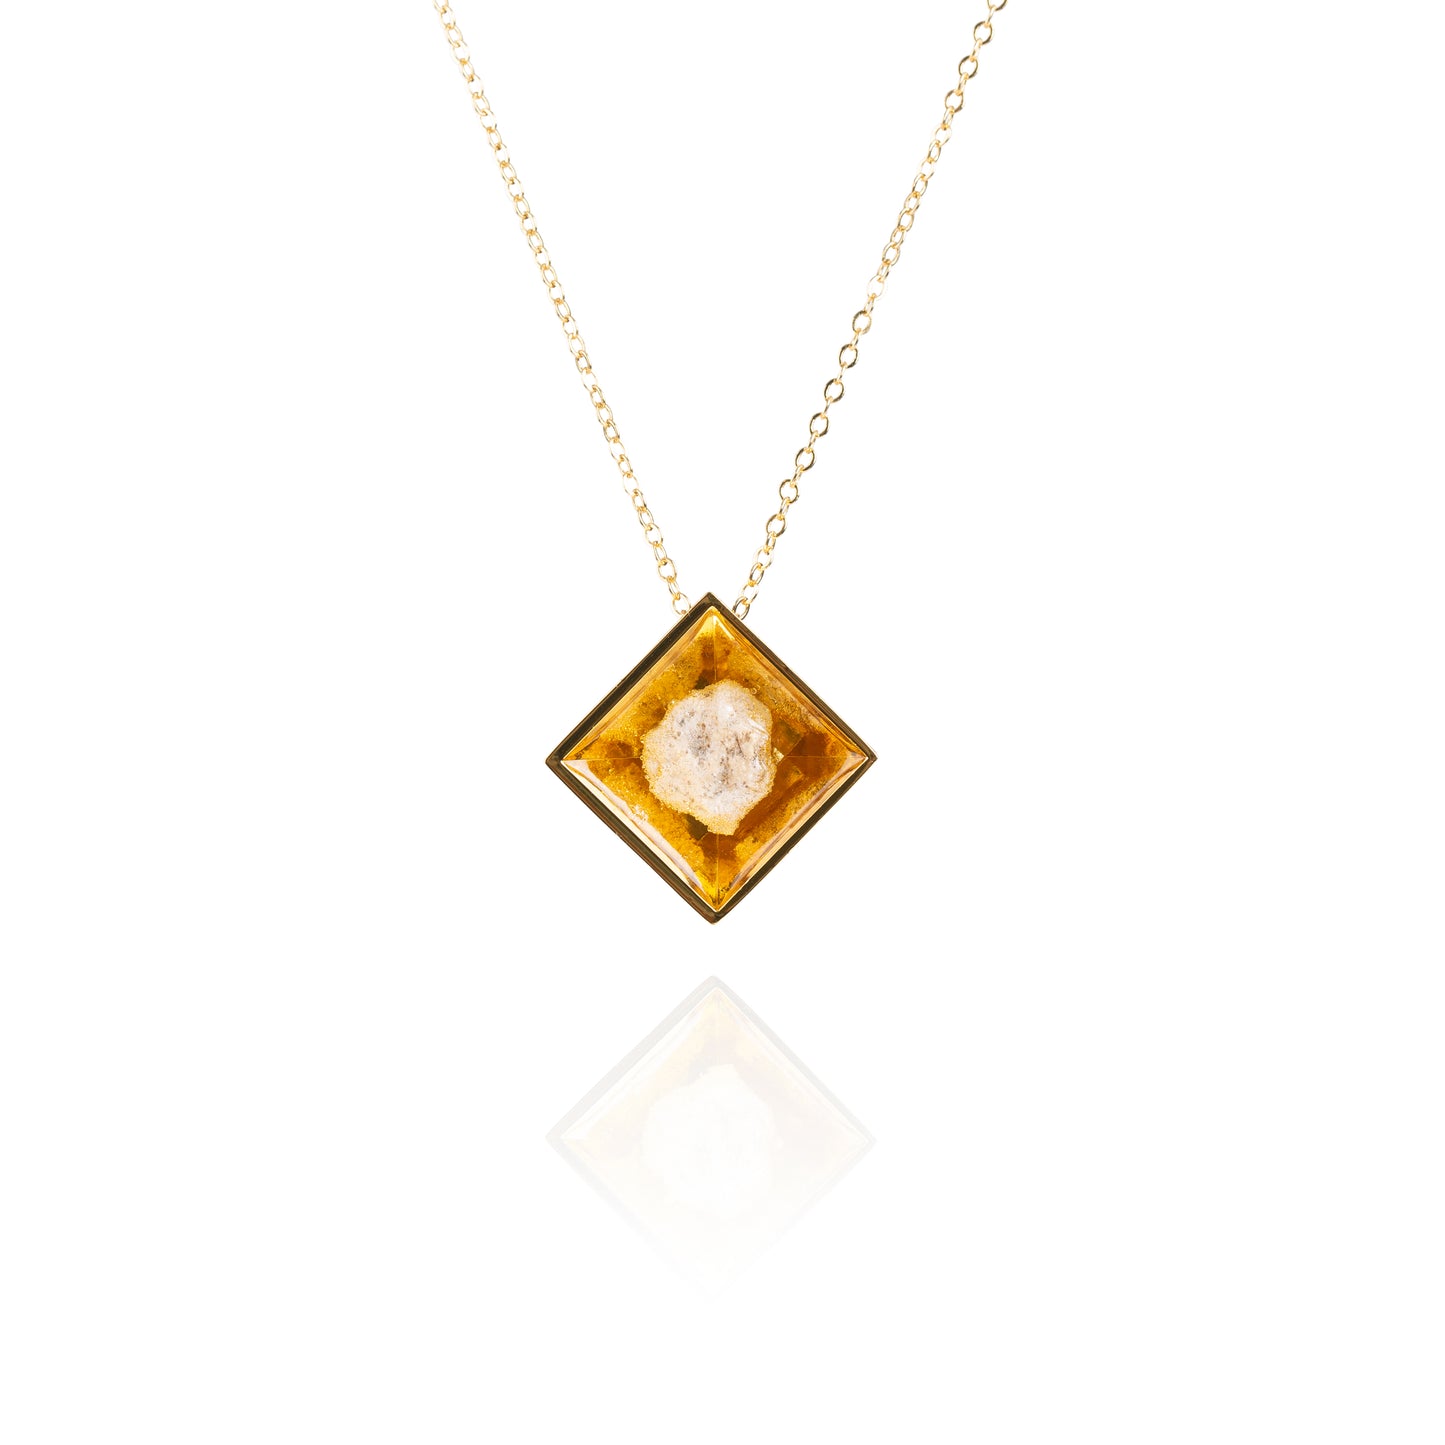 A small natural tan stone sitting in the middle of a diamond shaped metal pendant in a gold color. The pendant is hanging on a gold chain.